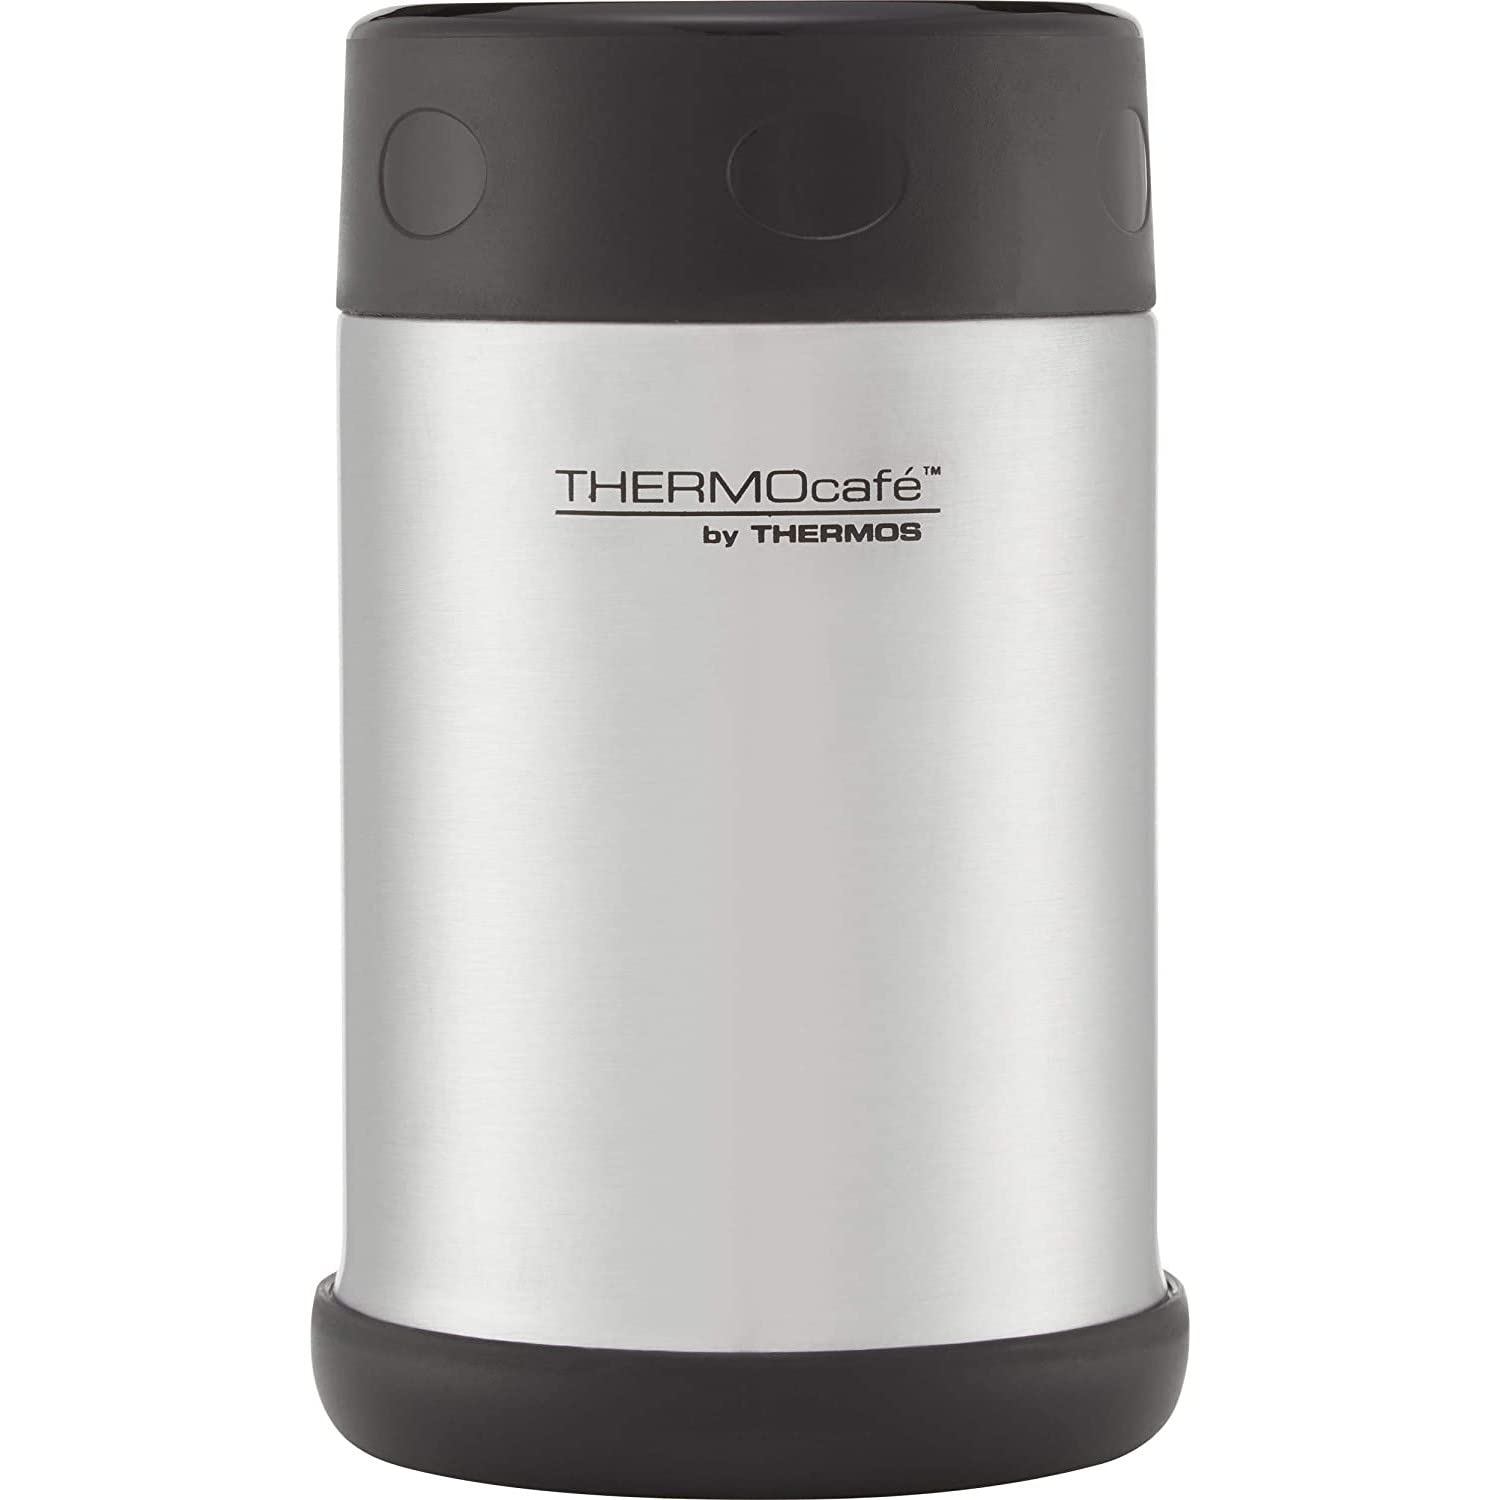 Thermos Cafe 400ml Stainless Steel Food Flask